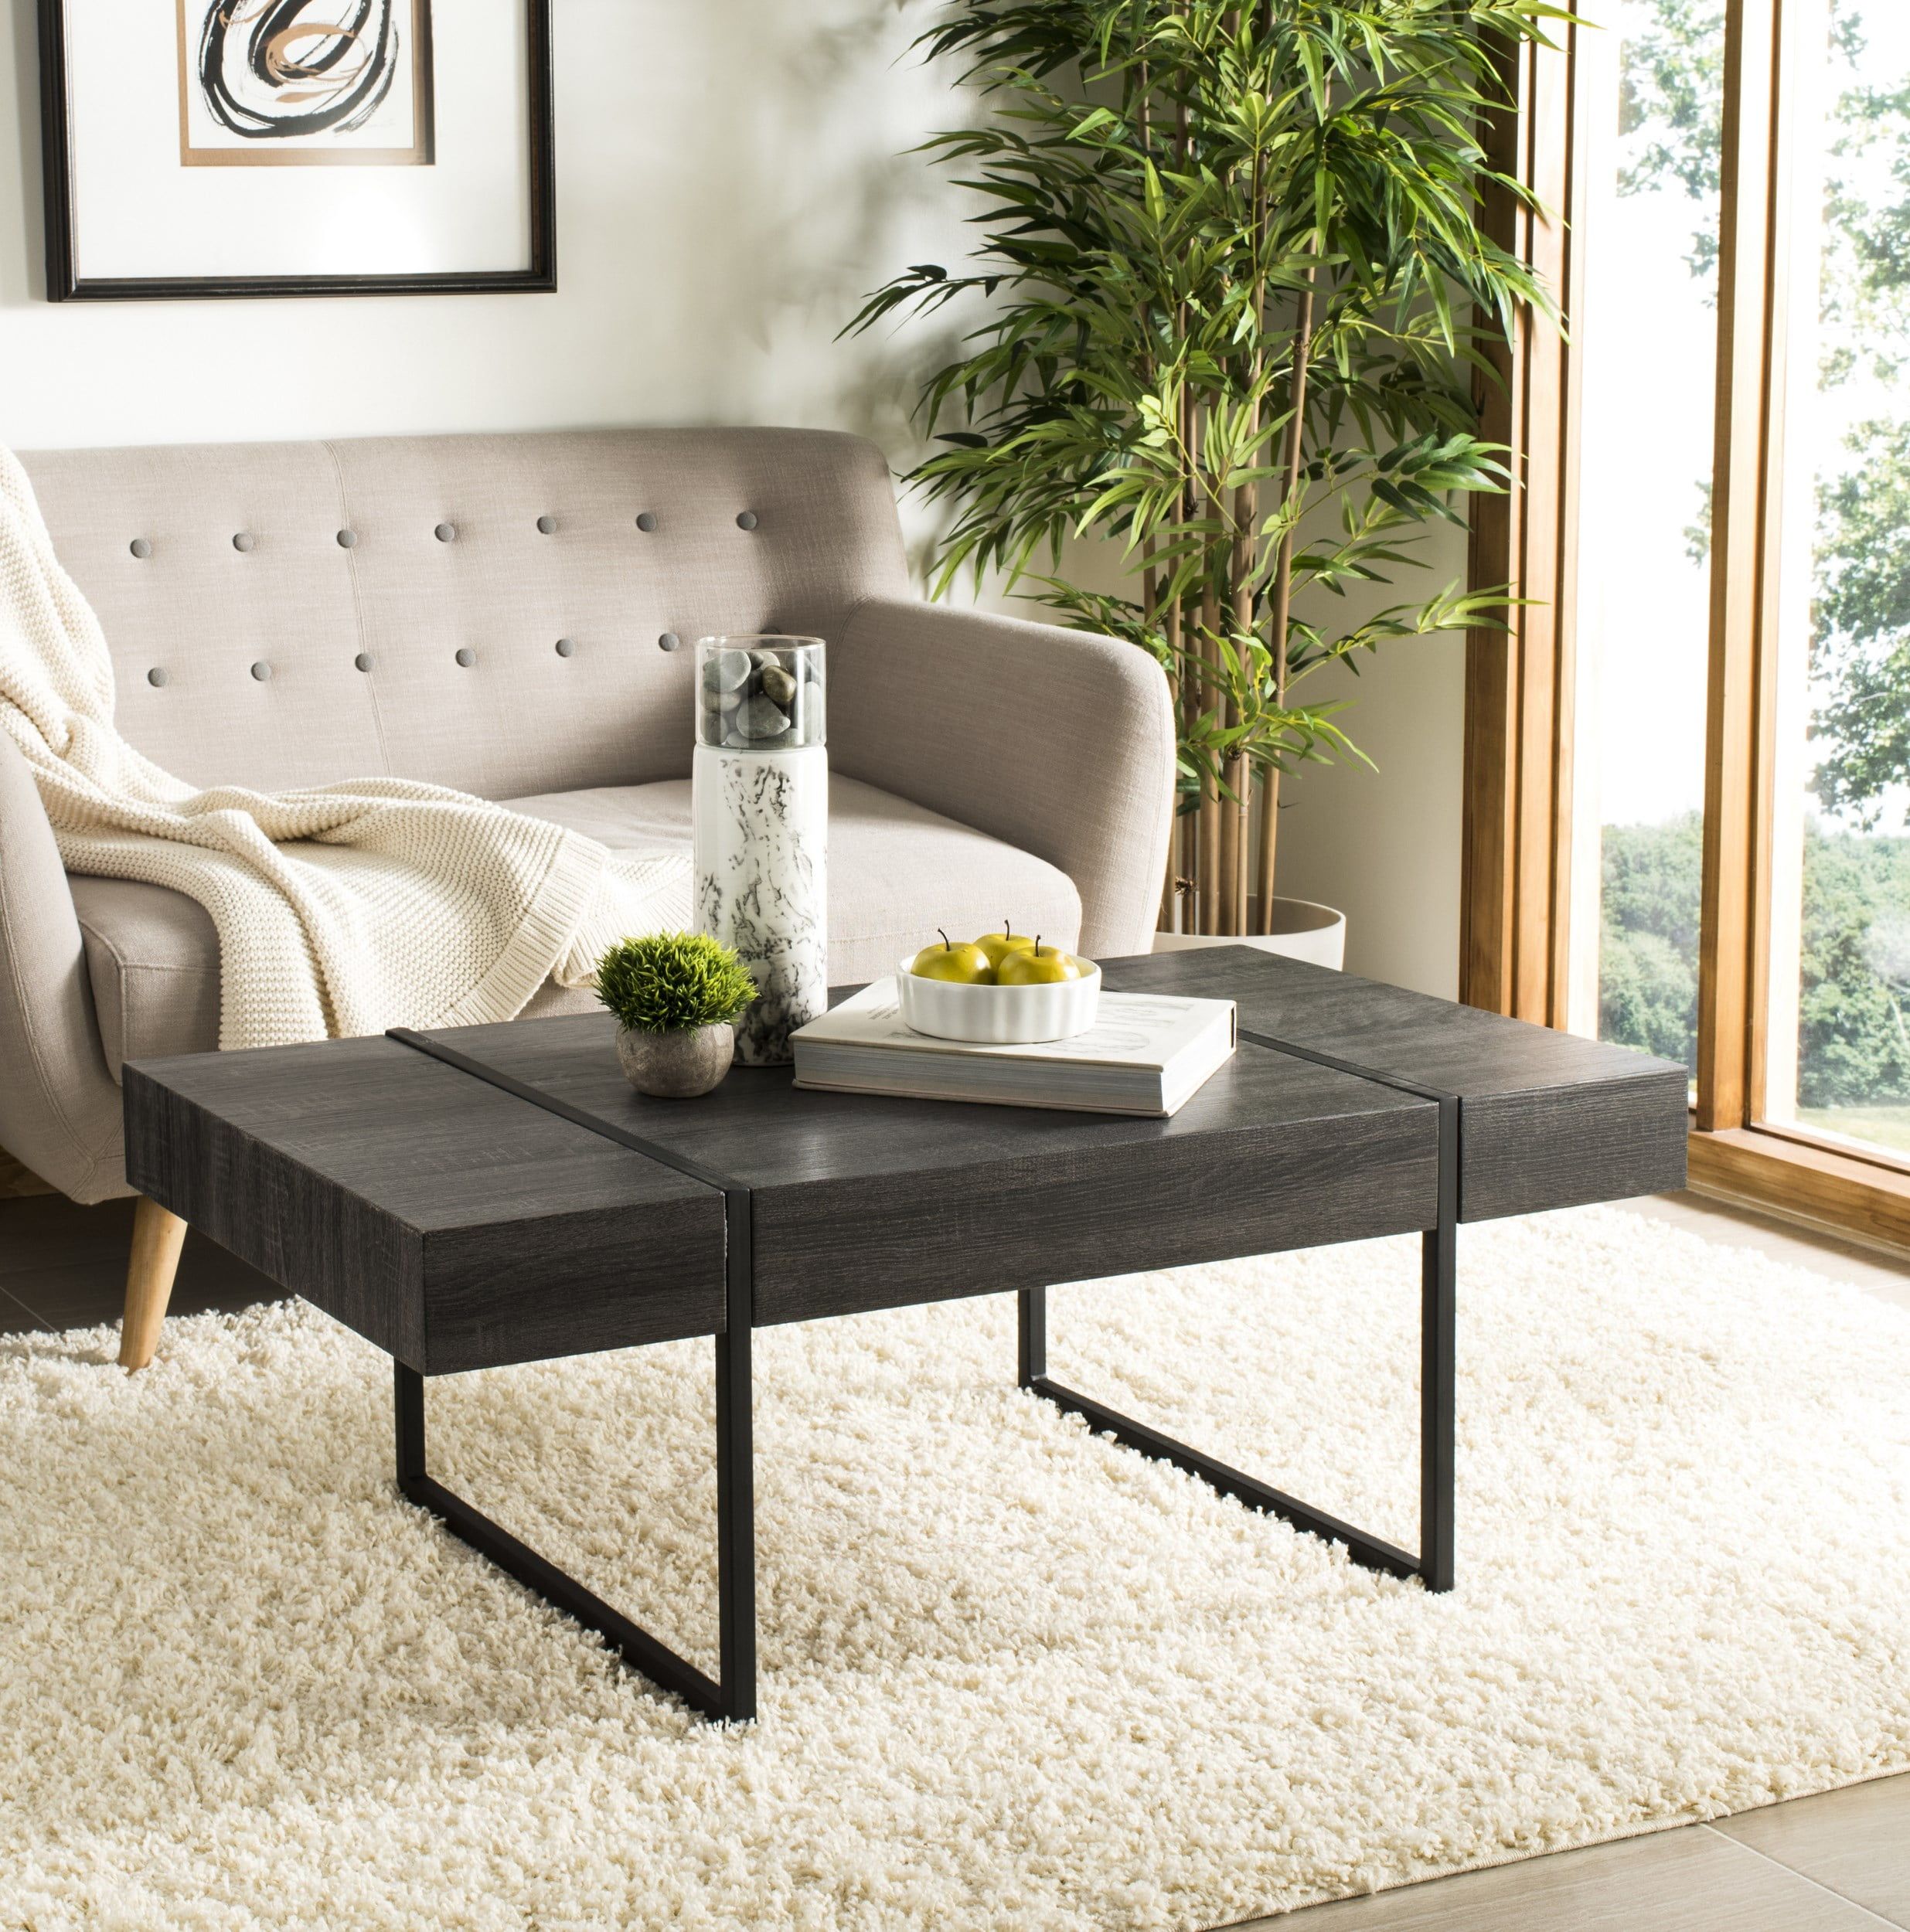 Safavieh Tristan Rectangular Modern Coffee Table Black – Walmart Pertaining To Rectangular Coffee Tables With Pedestal Bases (View 3 of 15)